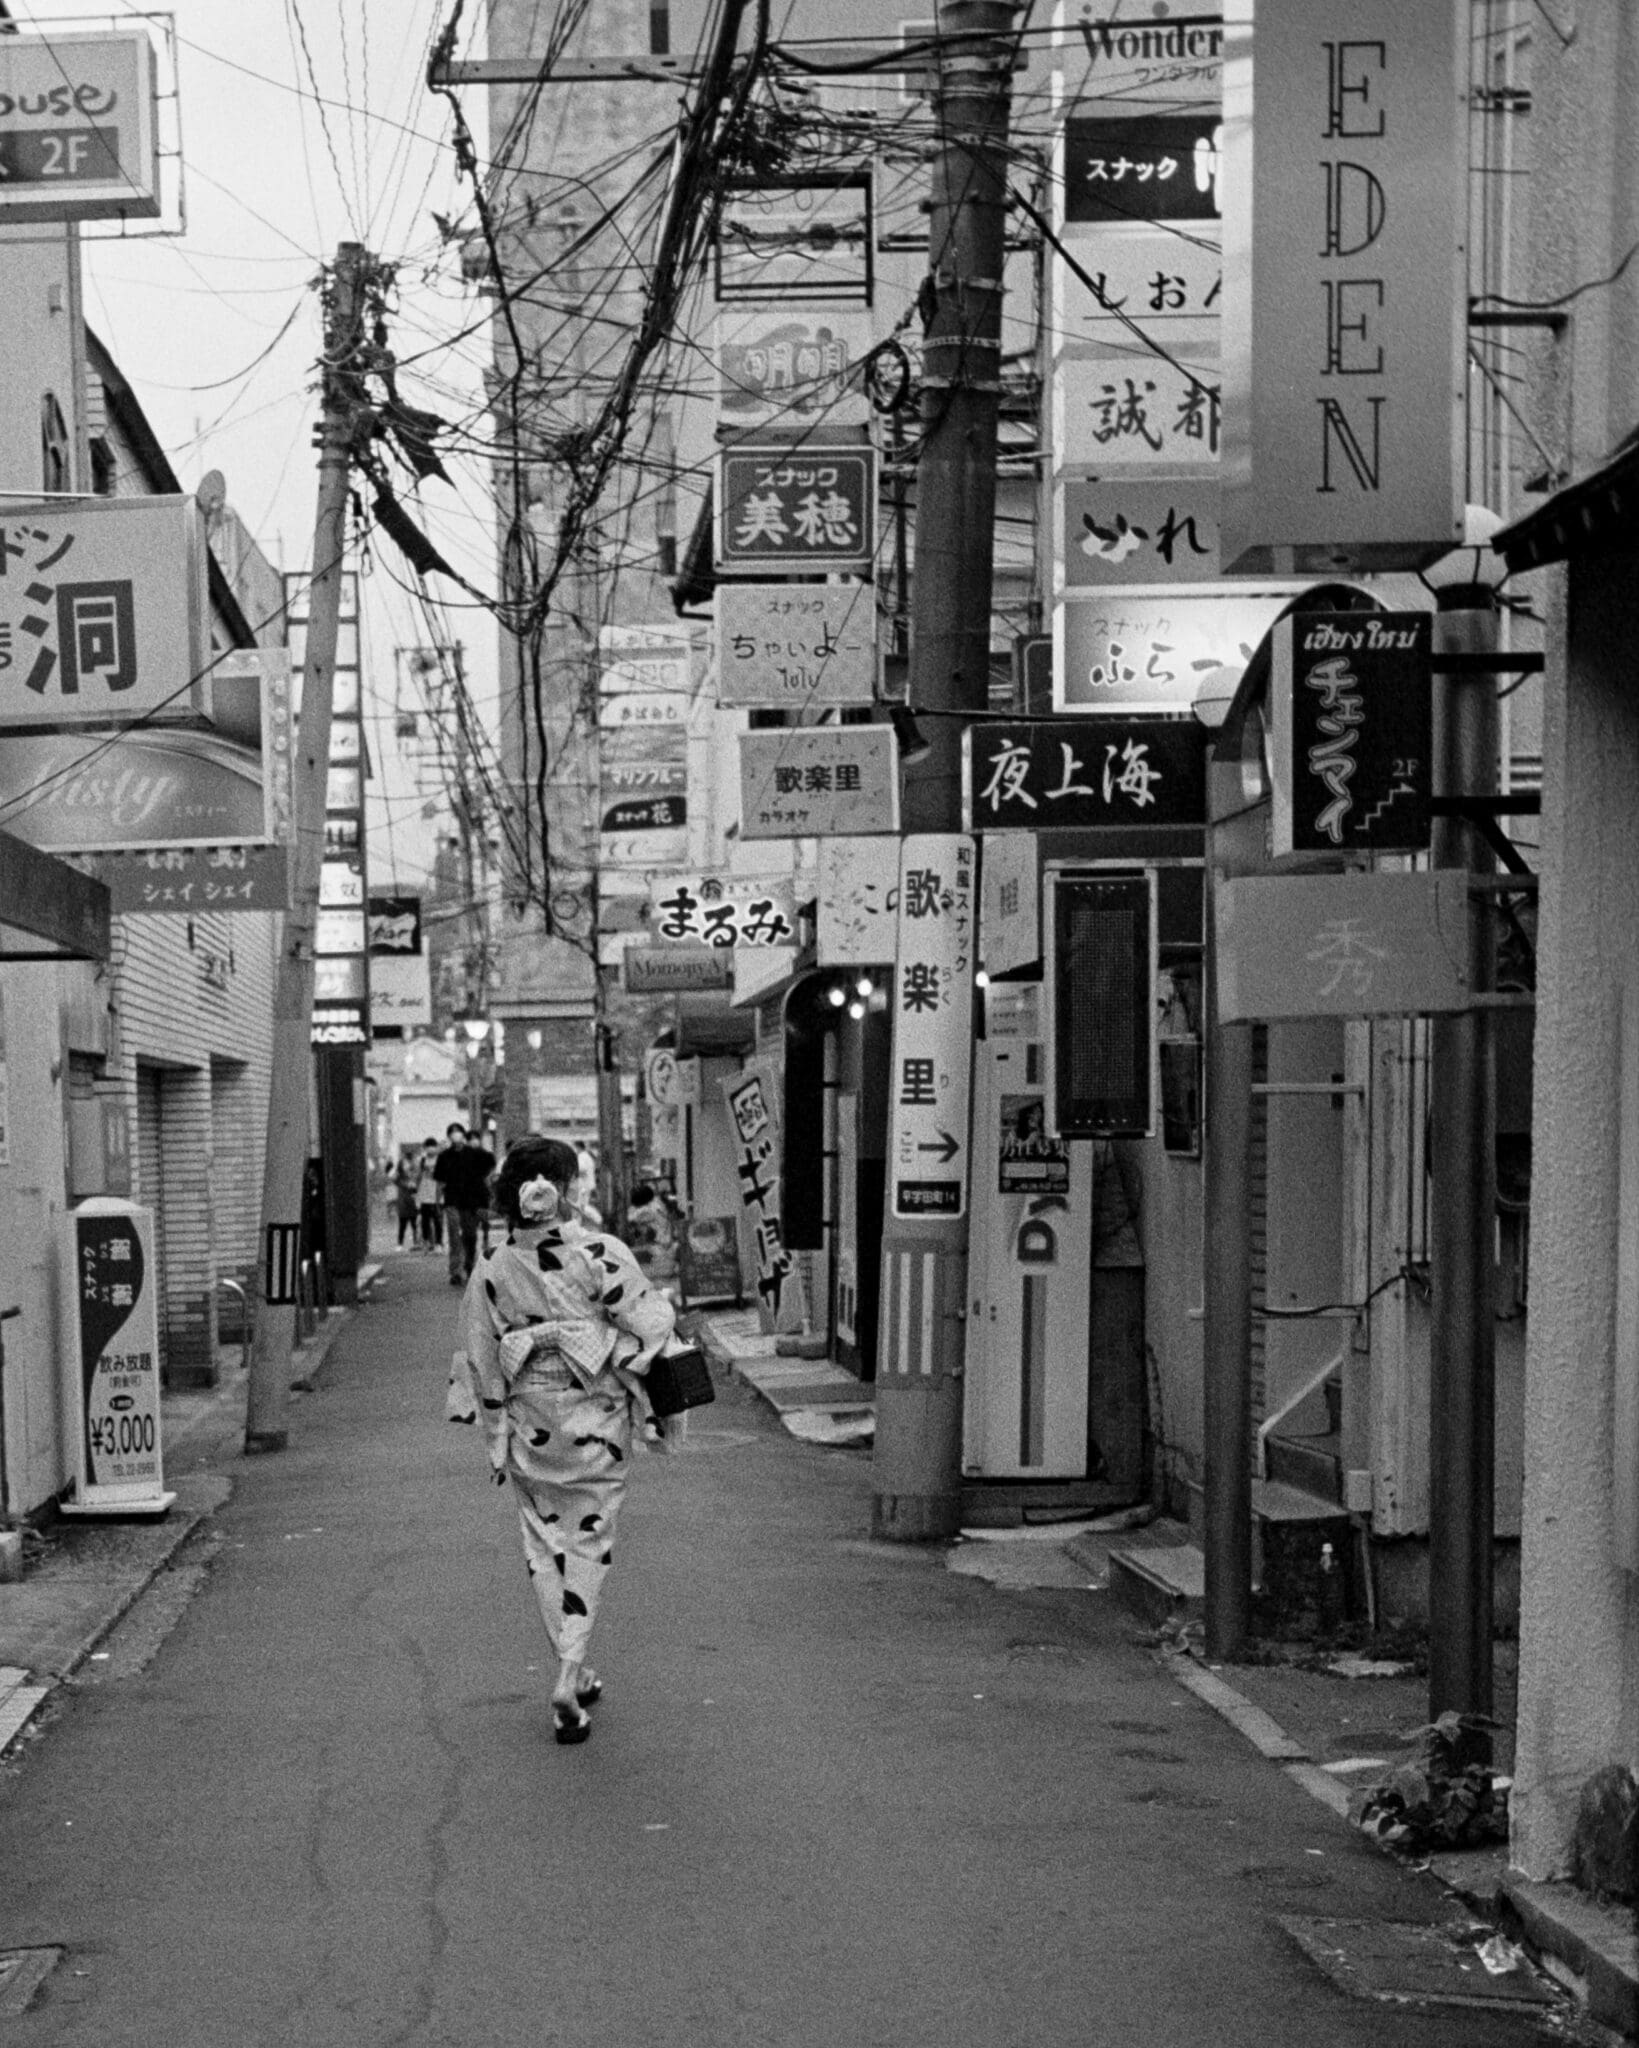 Kimono-clad person in a bustling Japanese alley, a contrast of tradition and modernity in monochrome.